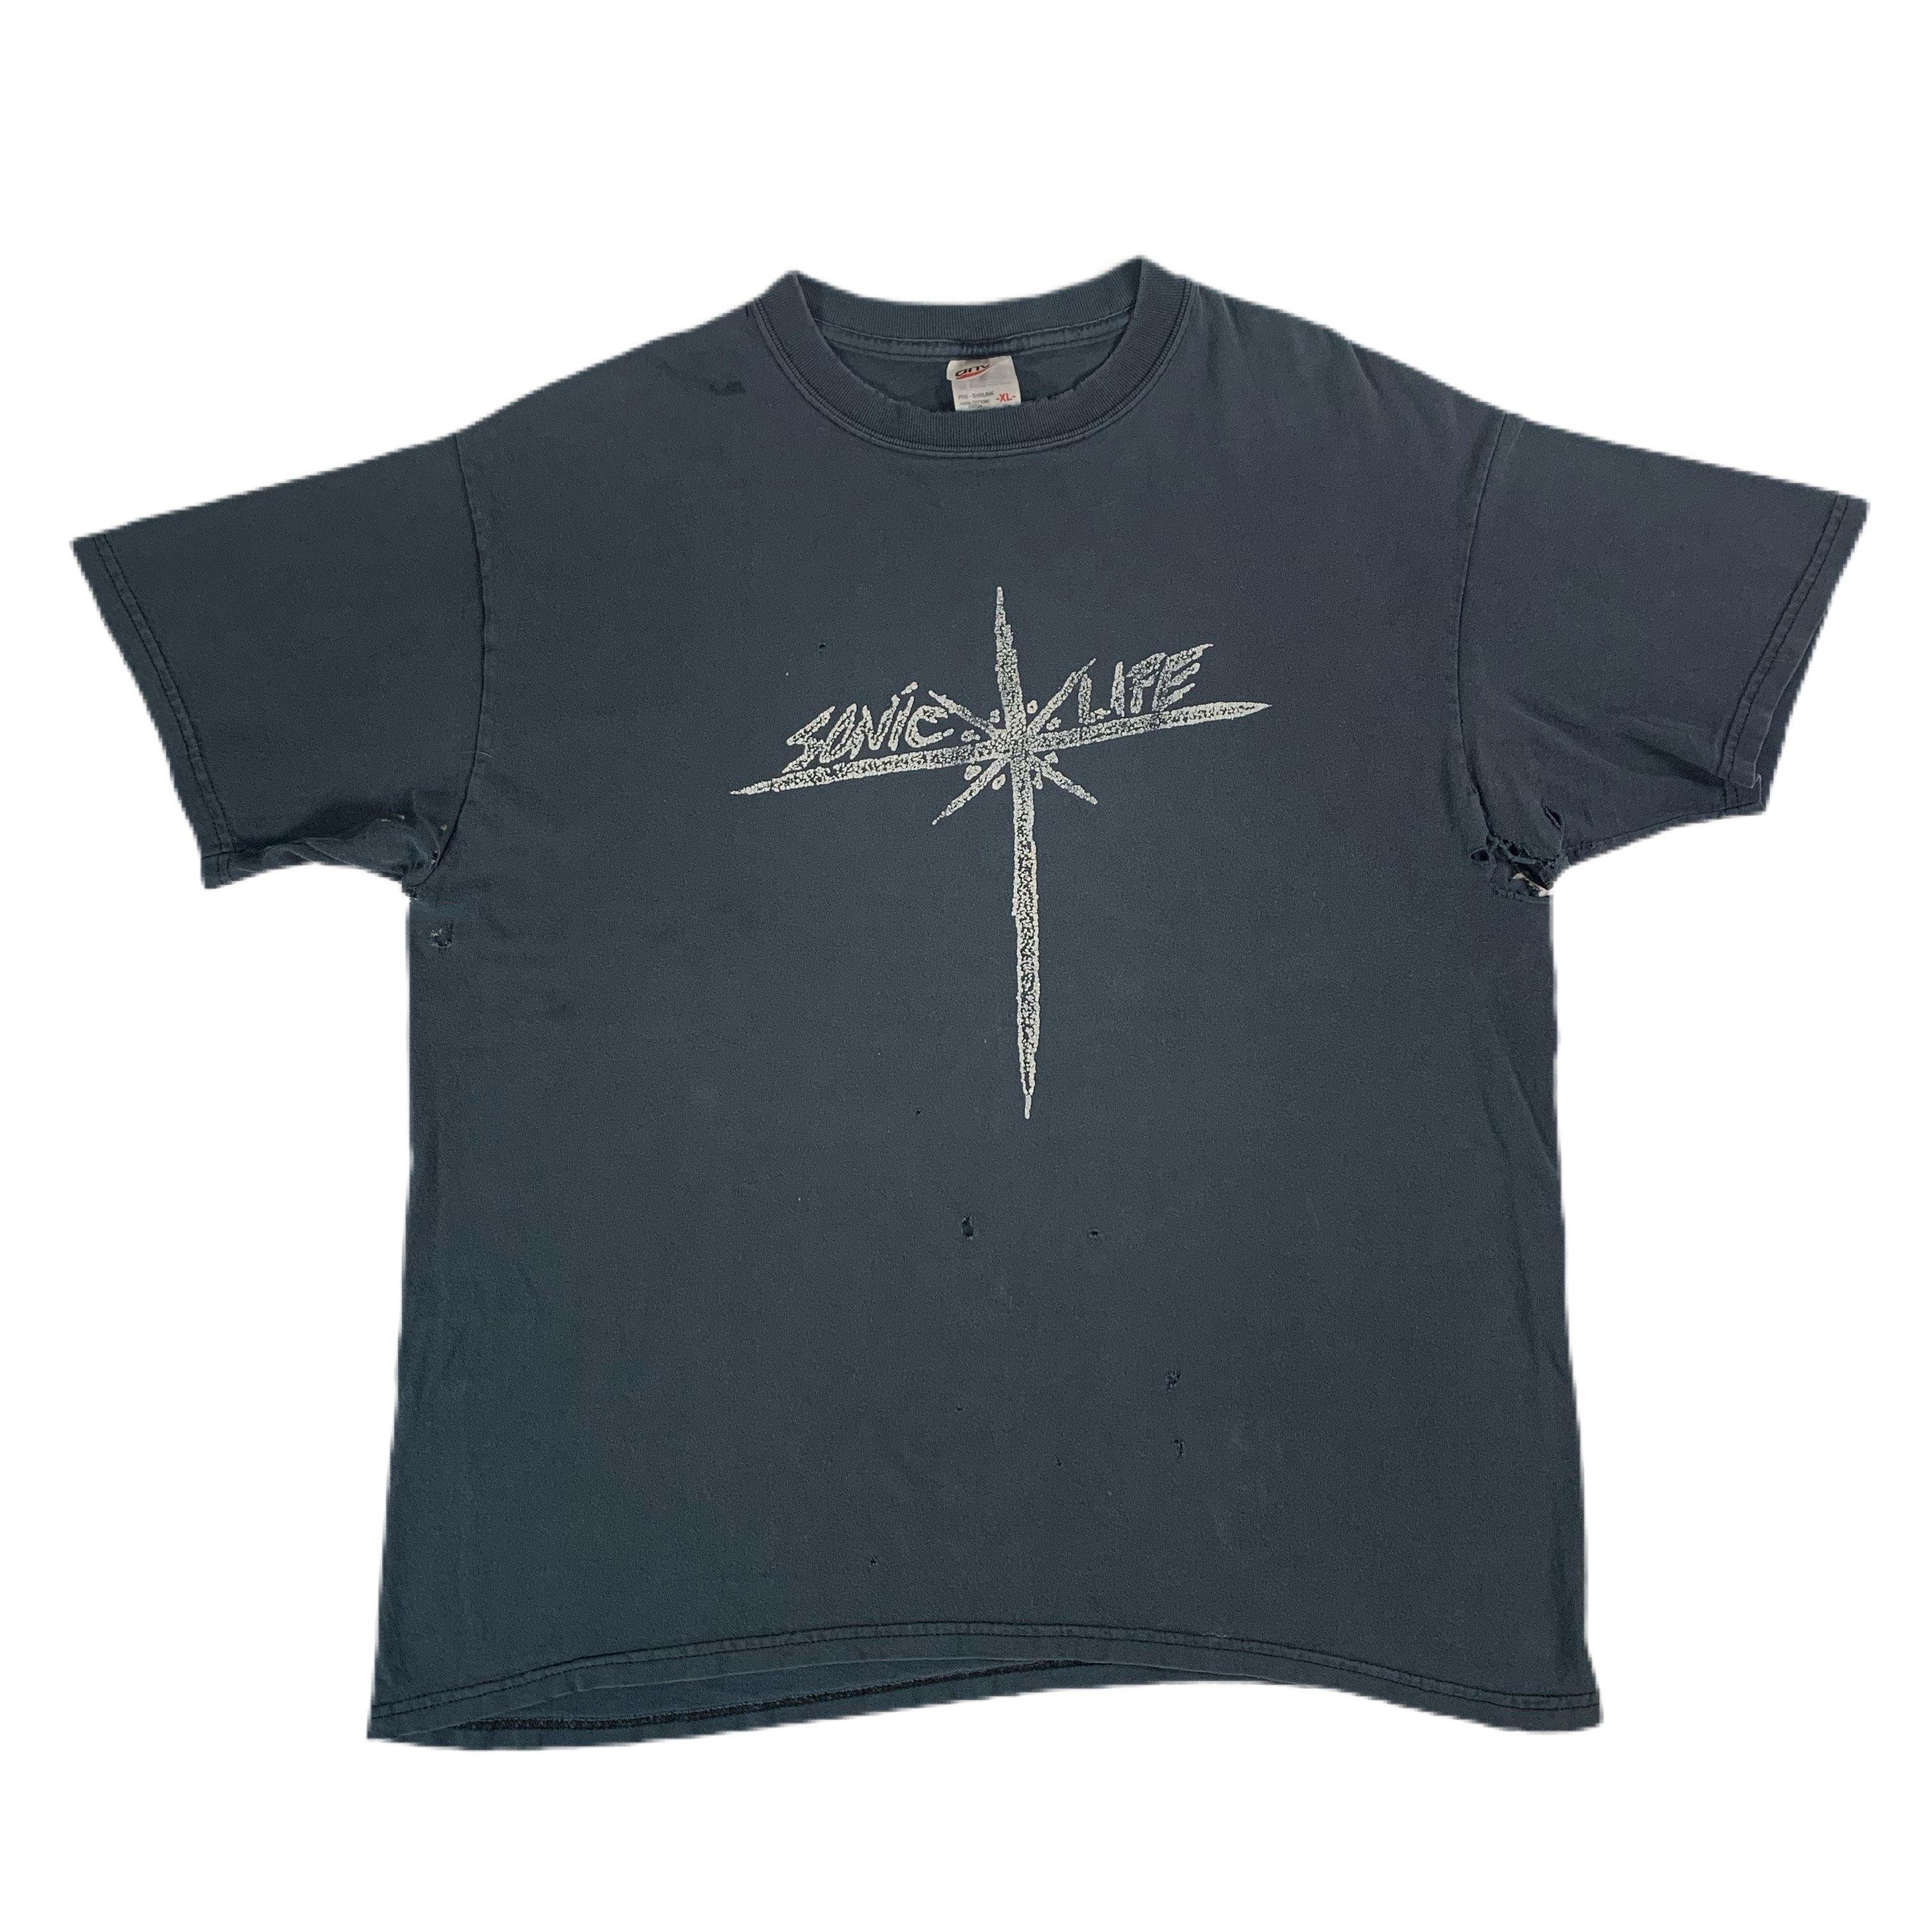 VINTAGE SONIC YOUTH SONIC LIFE TEE